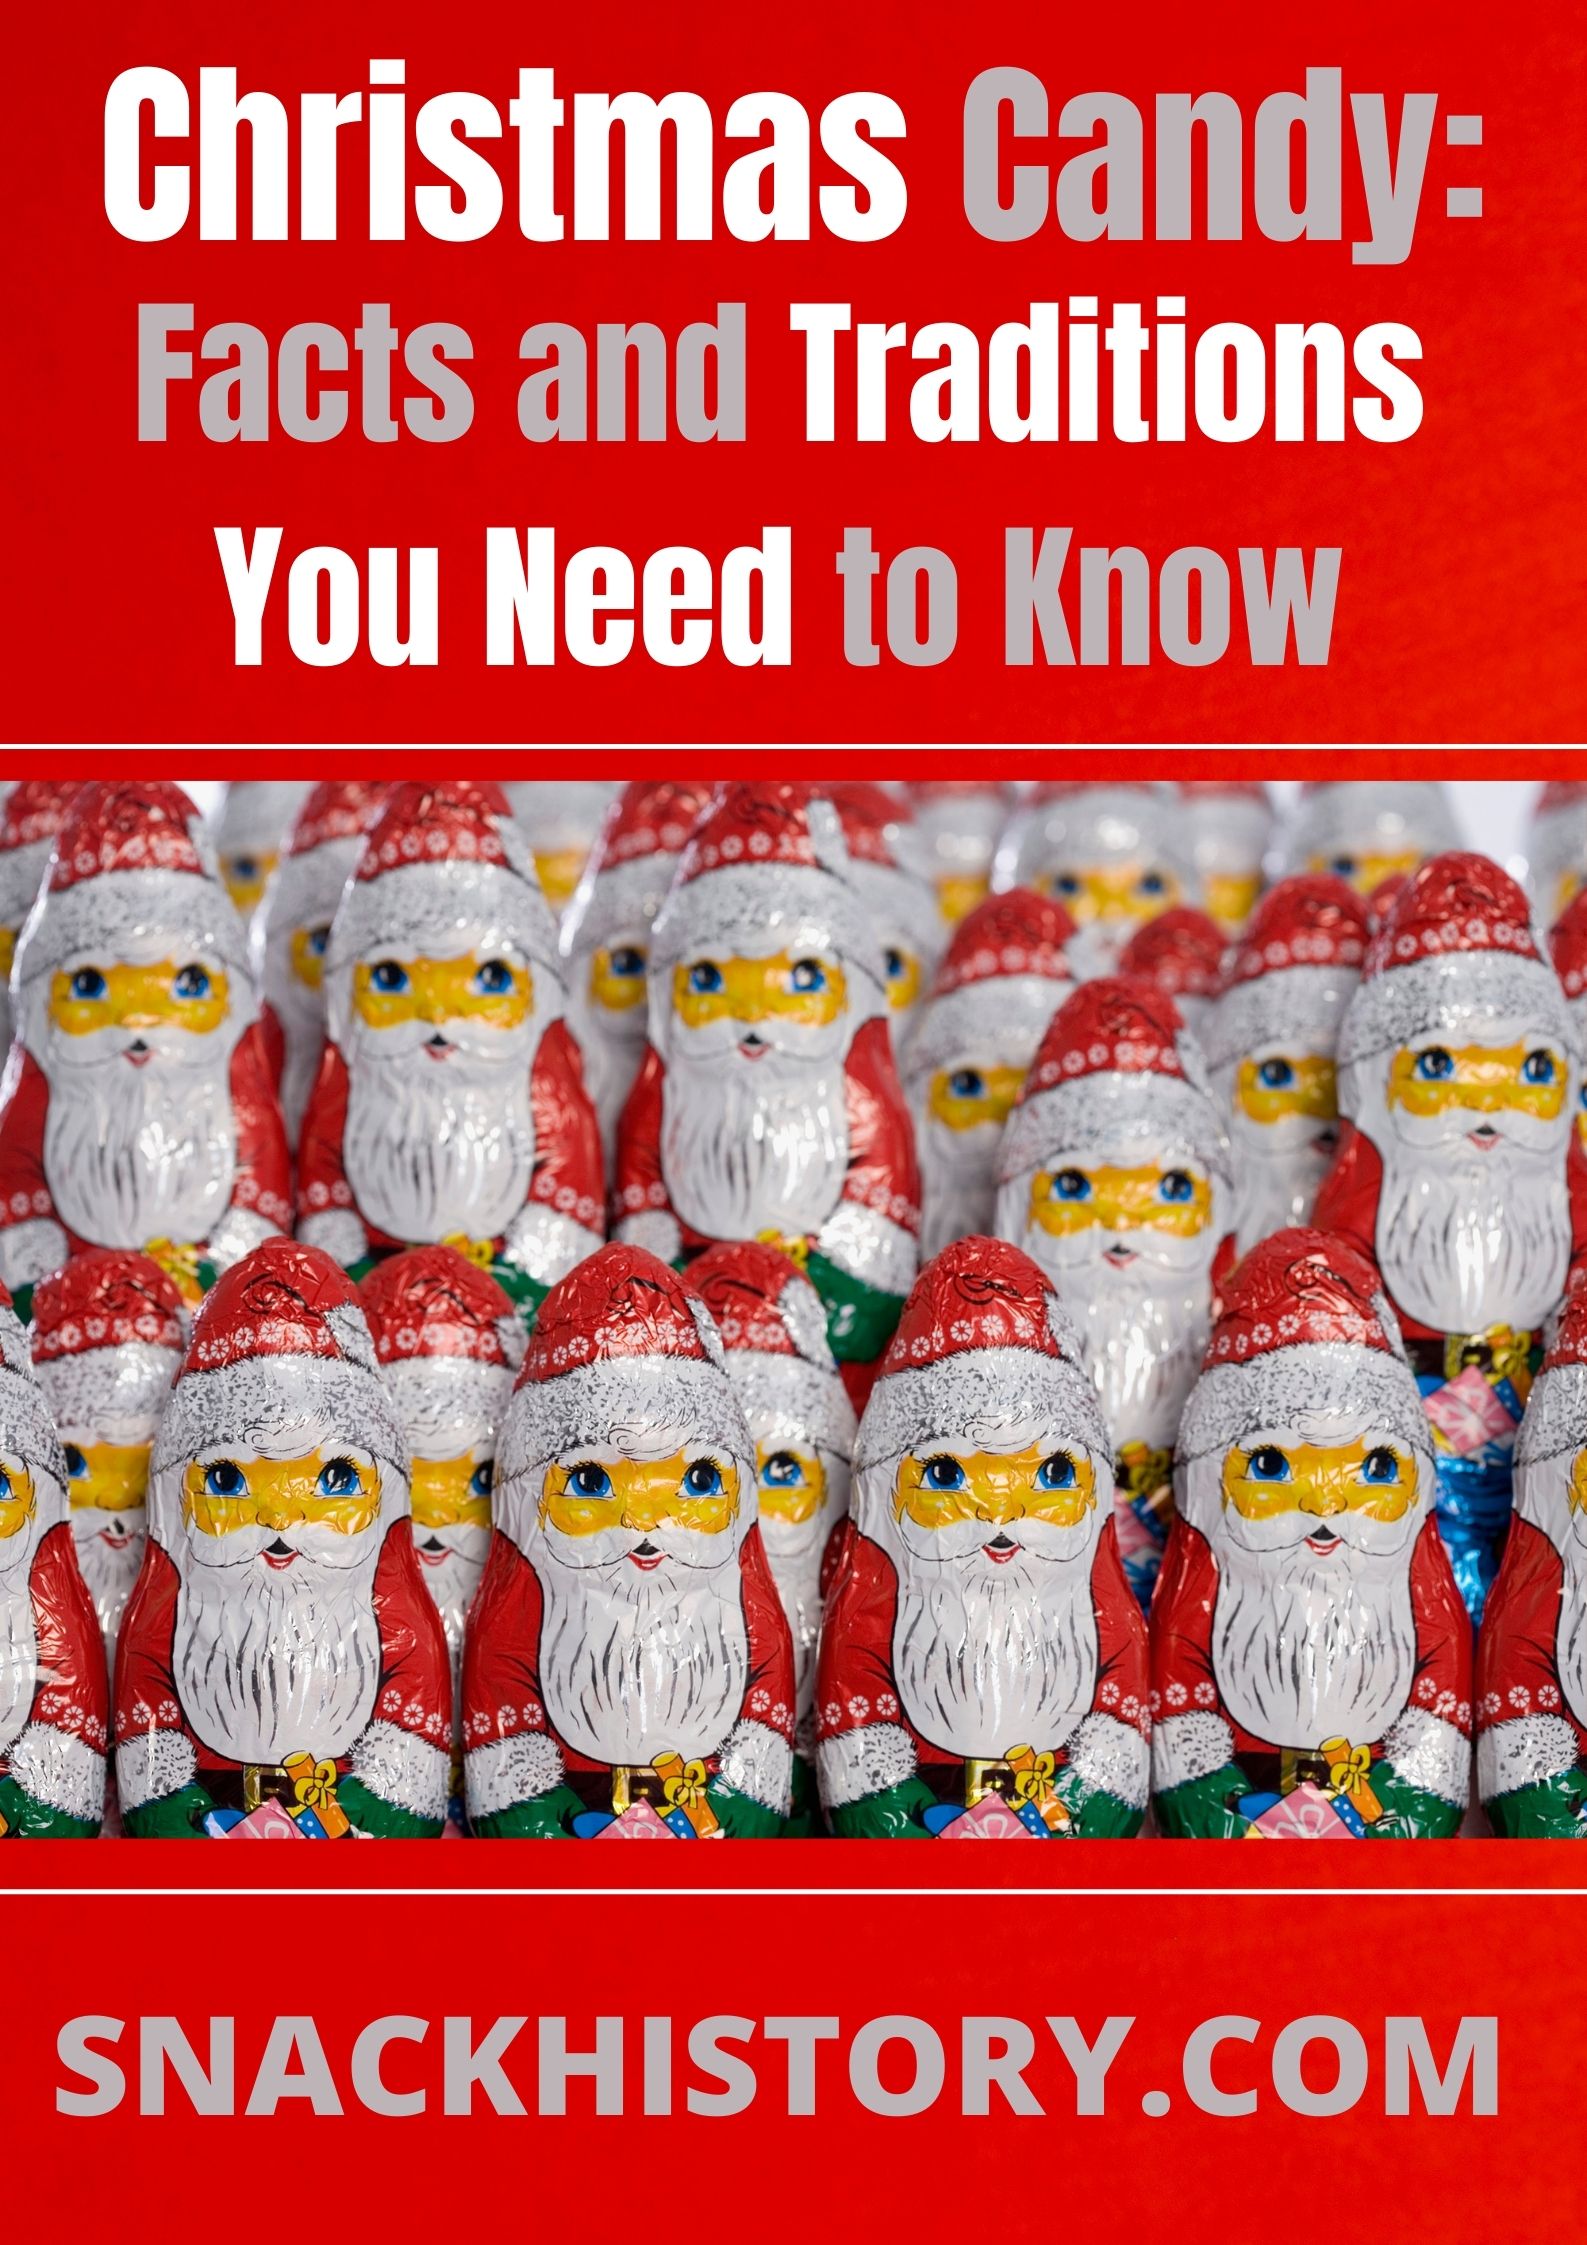 christmas-candy-facts-and-traditions-you-need-to-know-snack-history